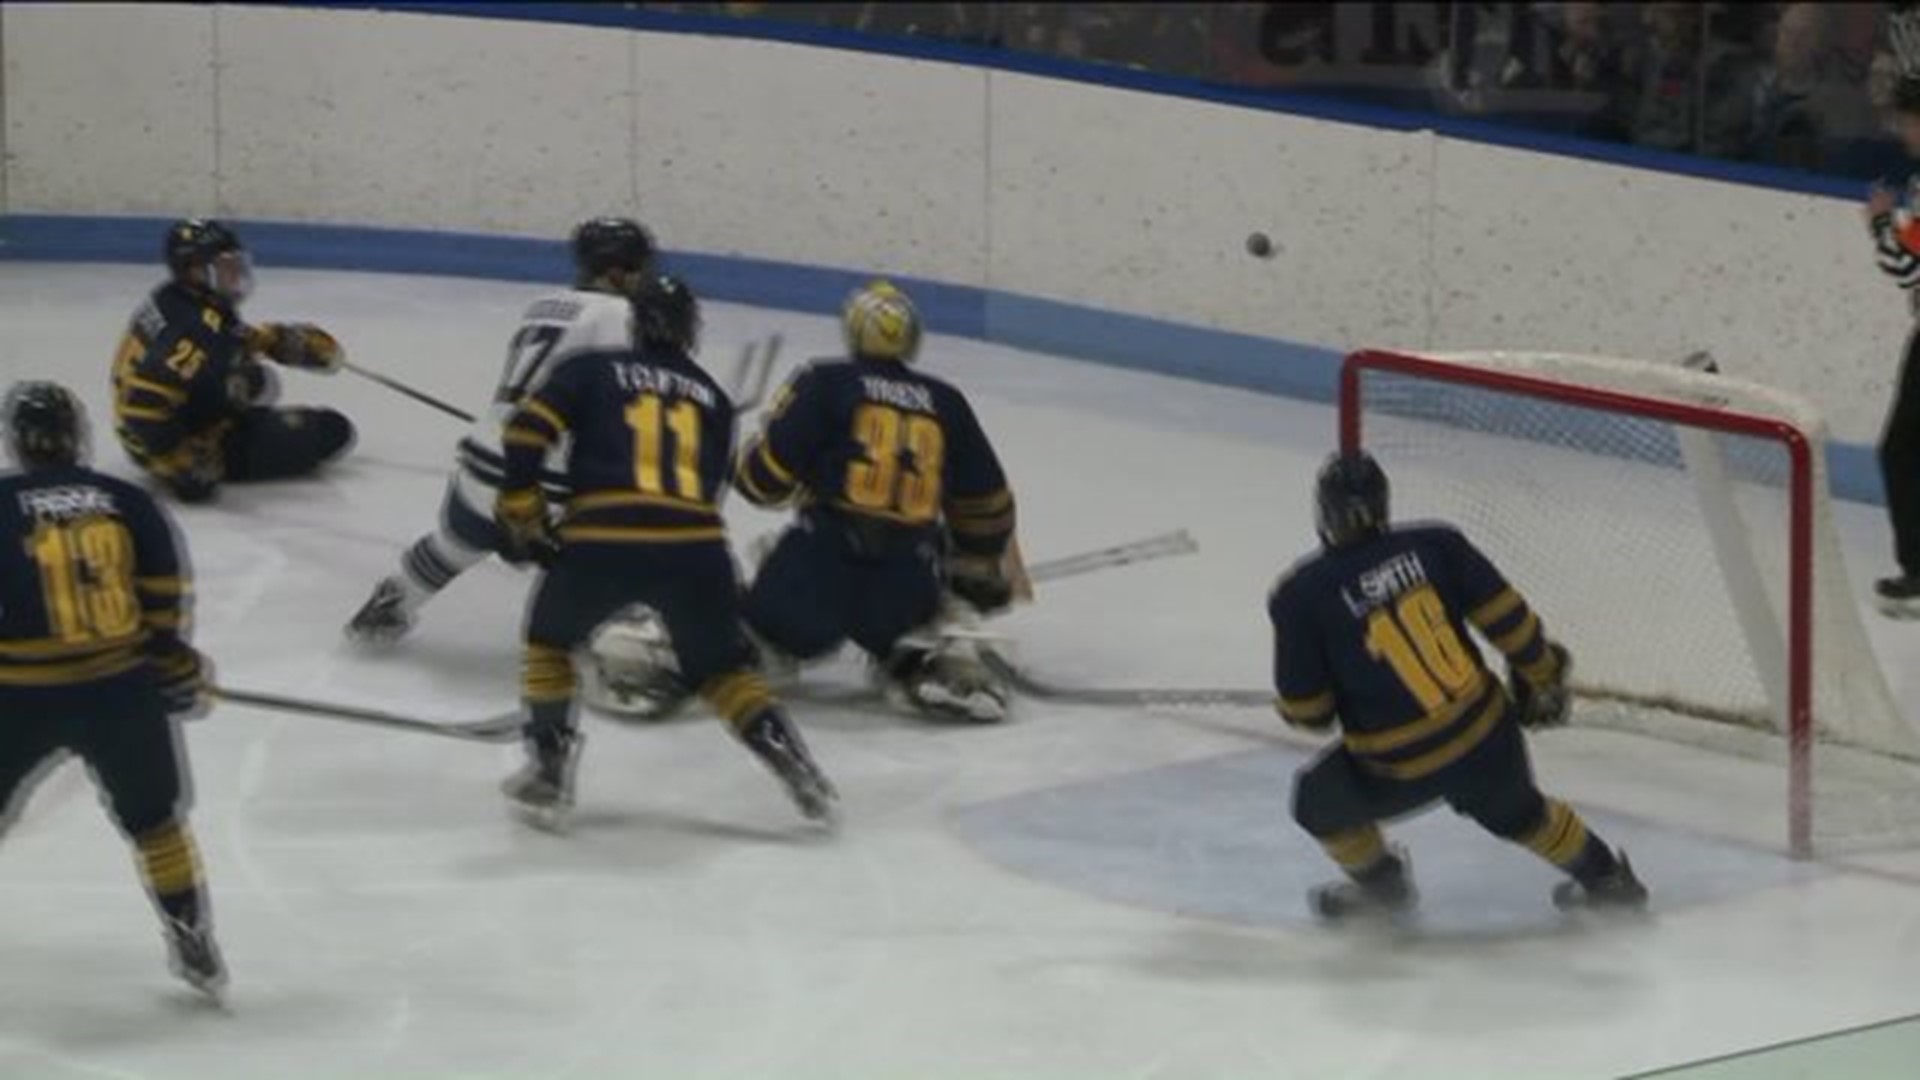 Yale and Quinnipiac have a showdown on the ice